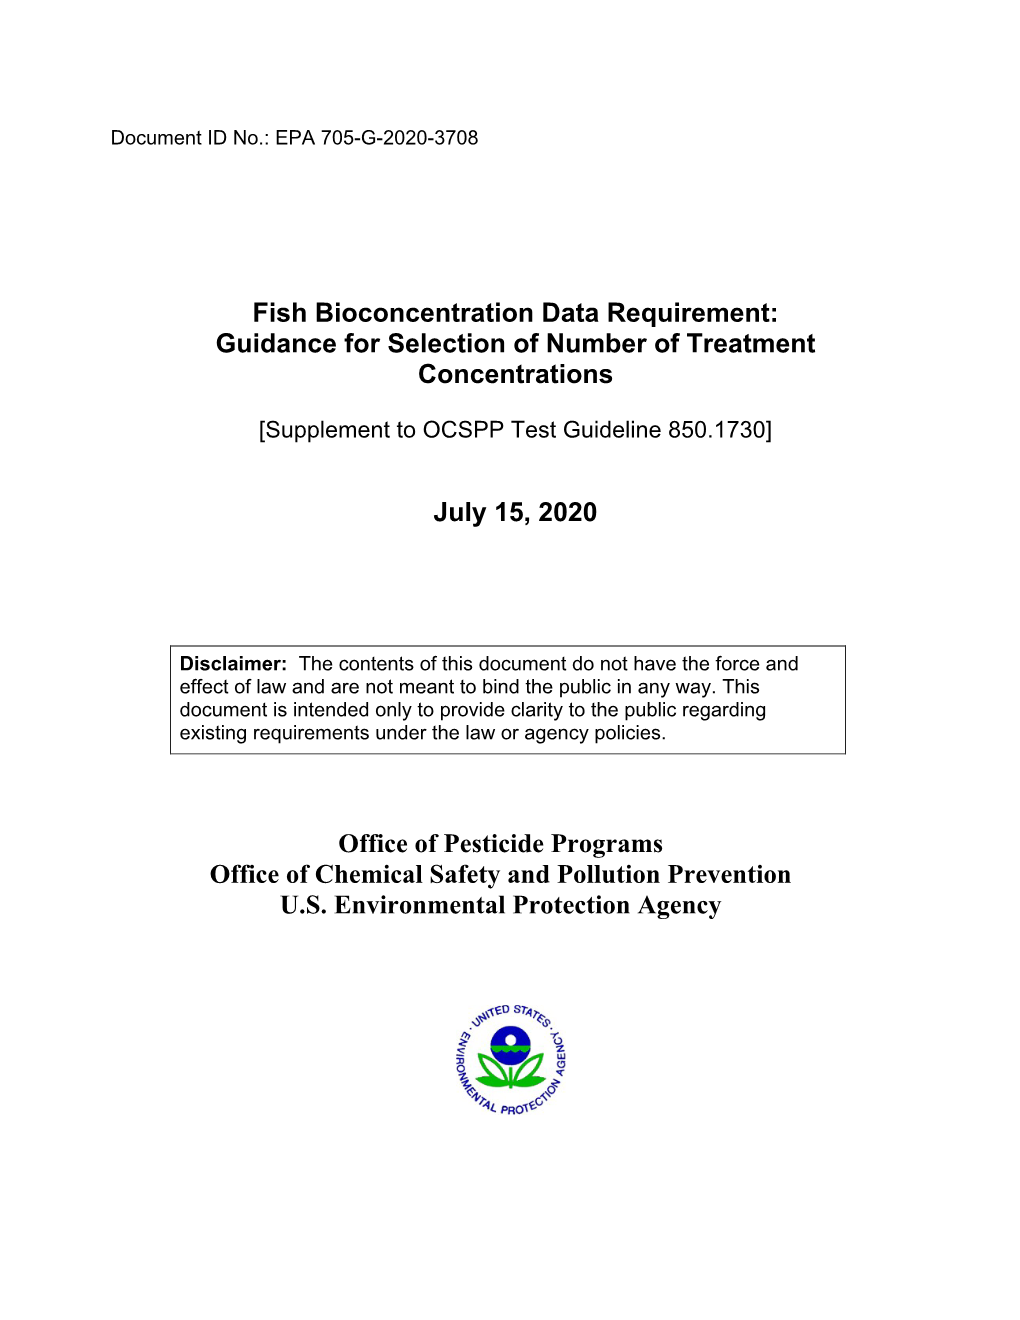 Fish Bioconcentration Data Requirement: Guidance for Selection of Number of Treatment Concentrations